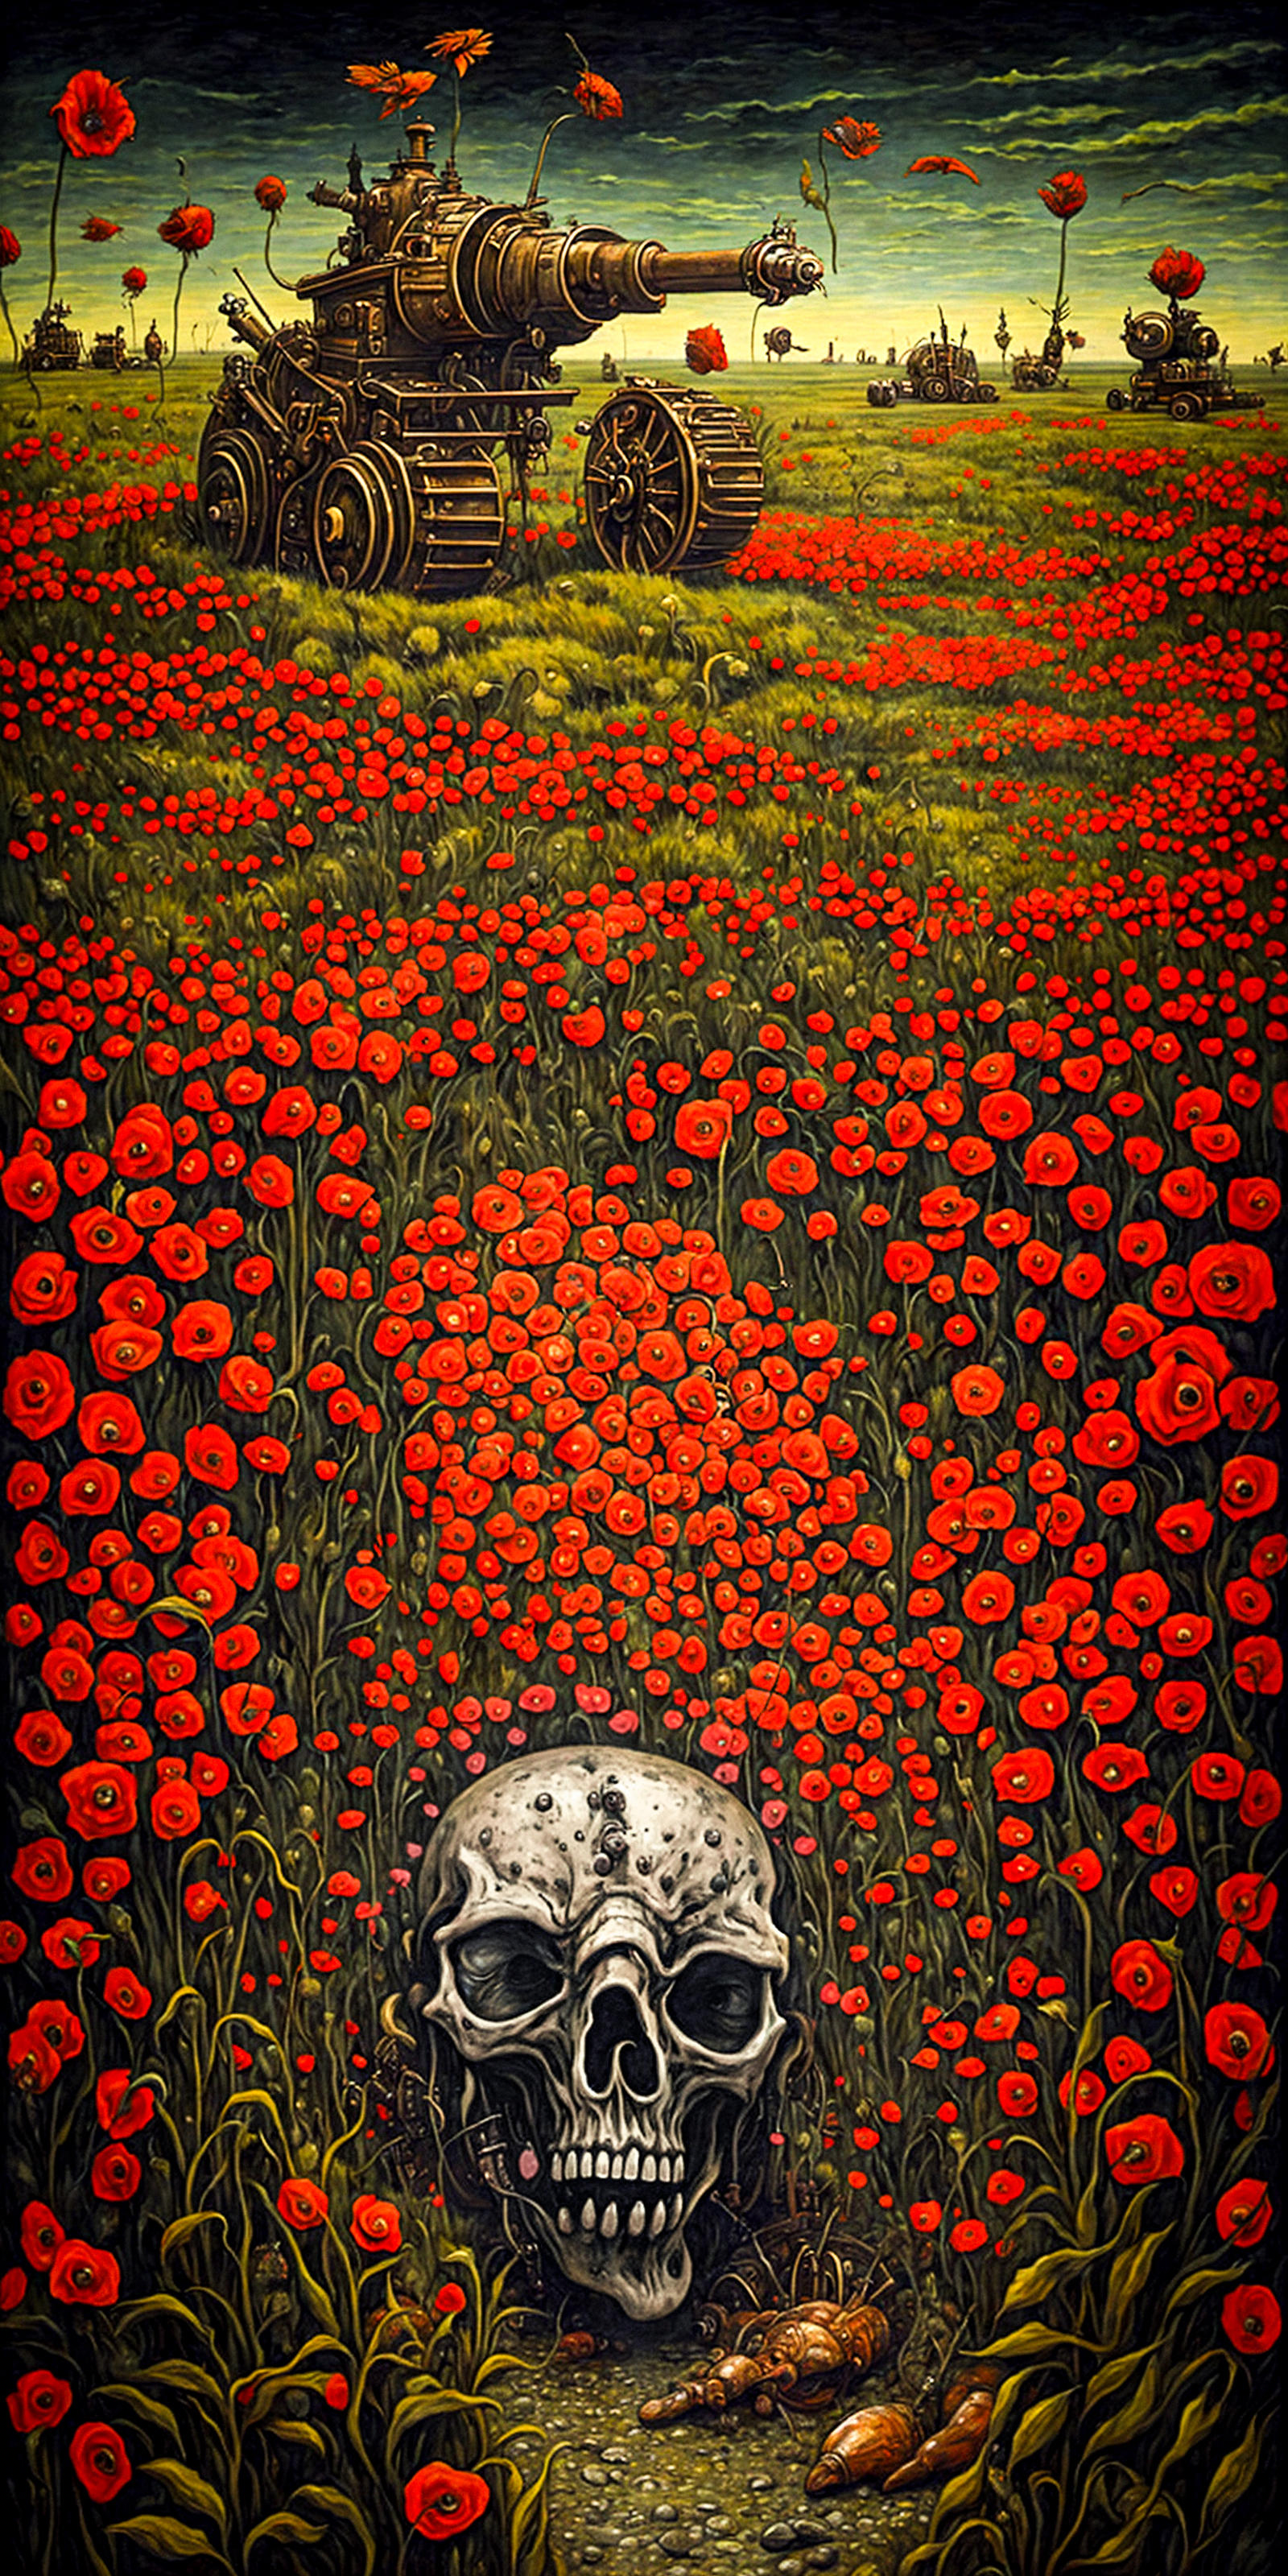 A skull sits in the middle of a field of red flowers.